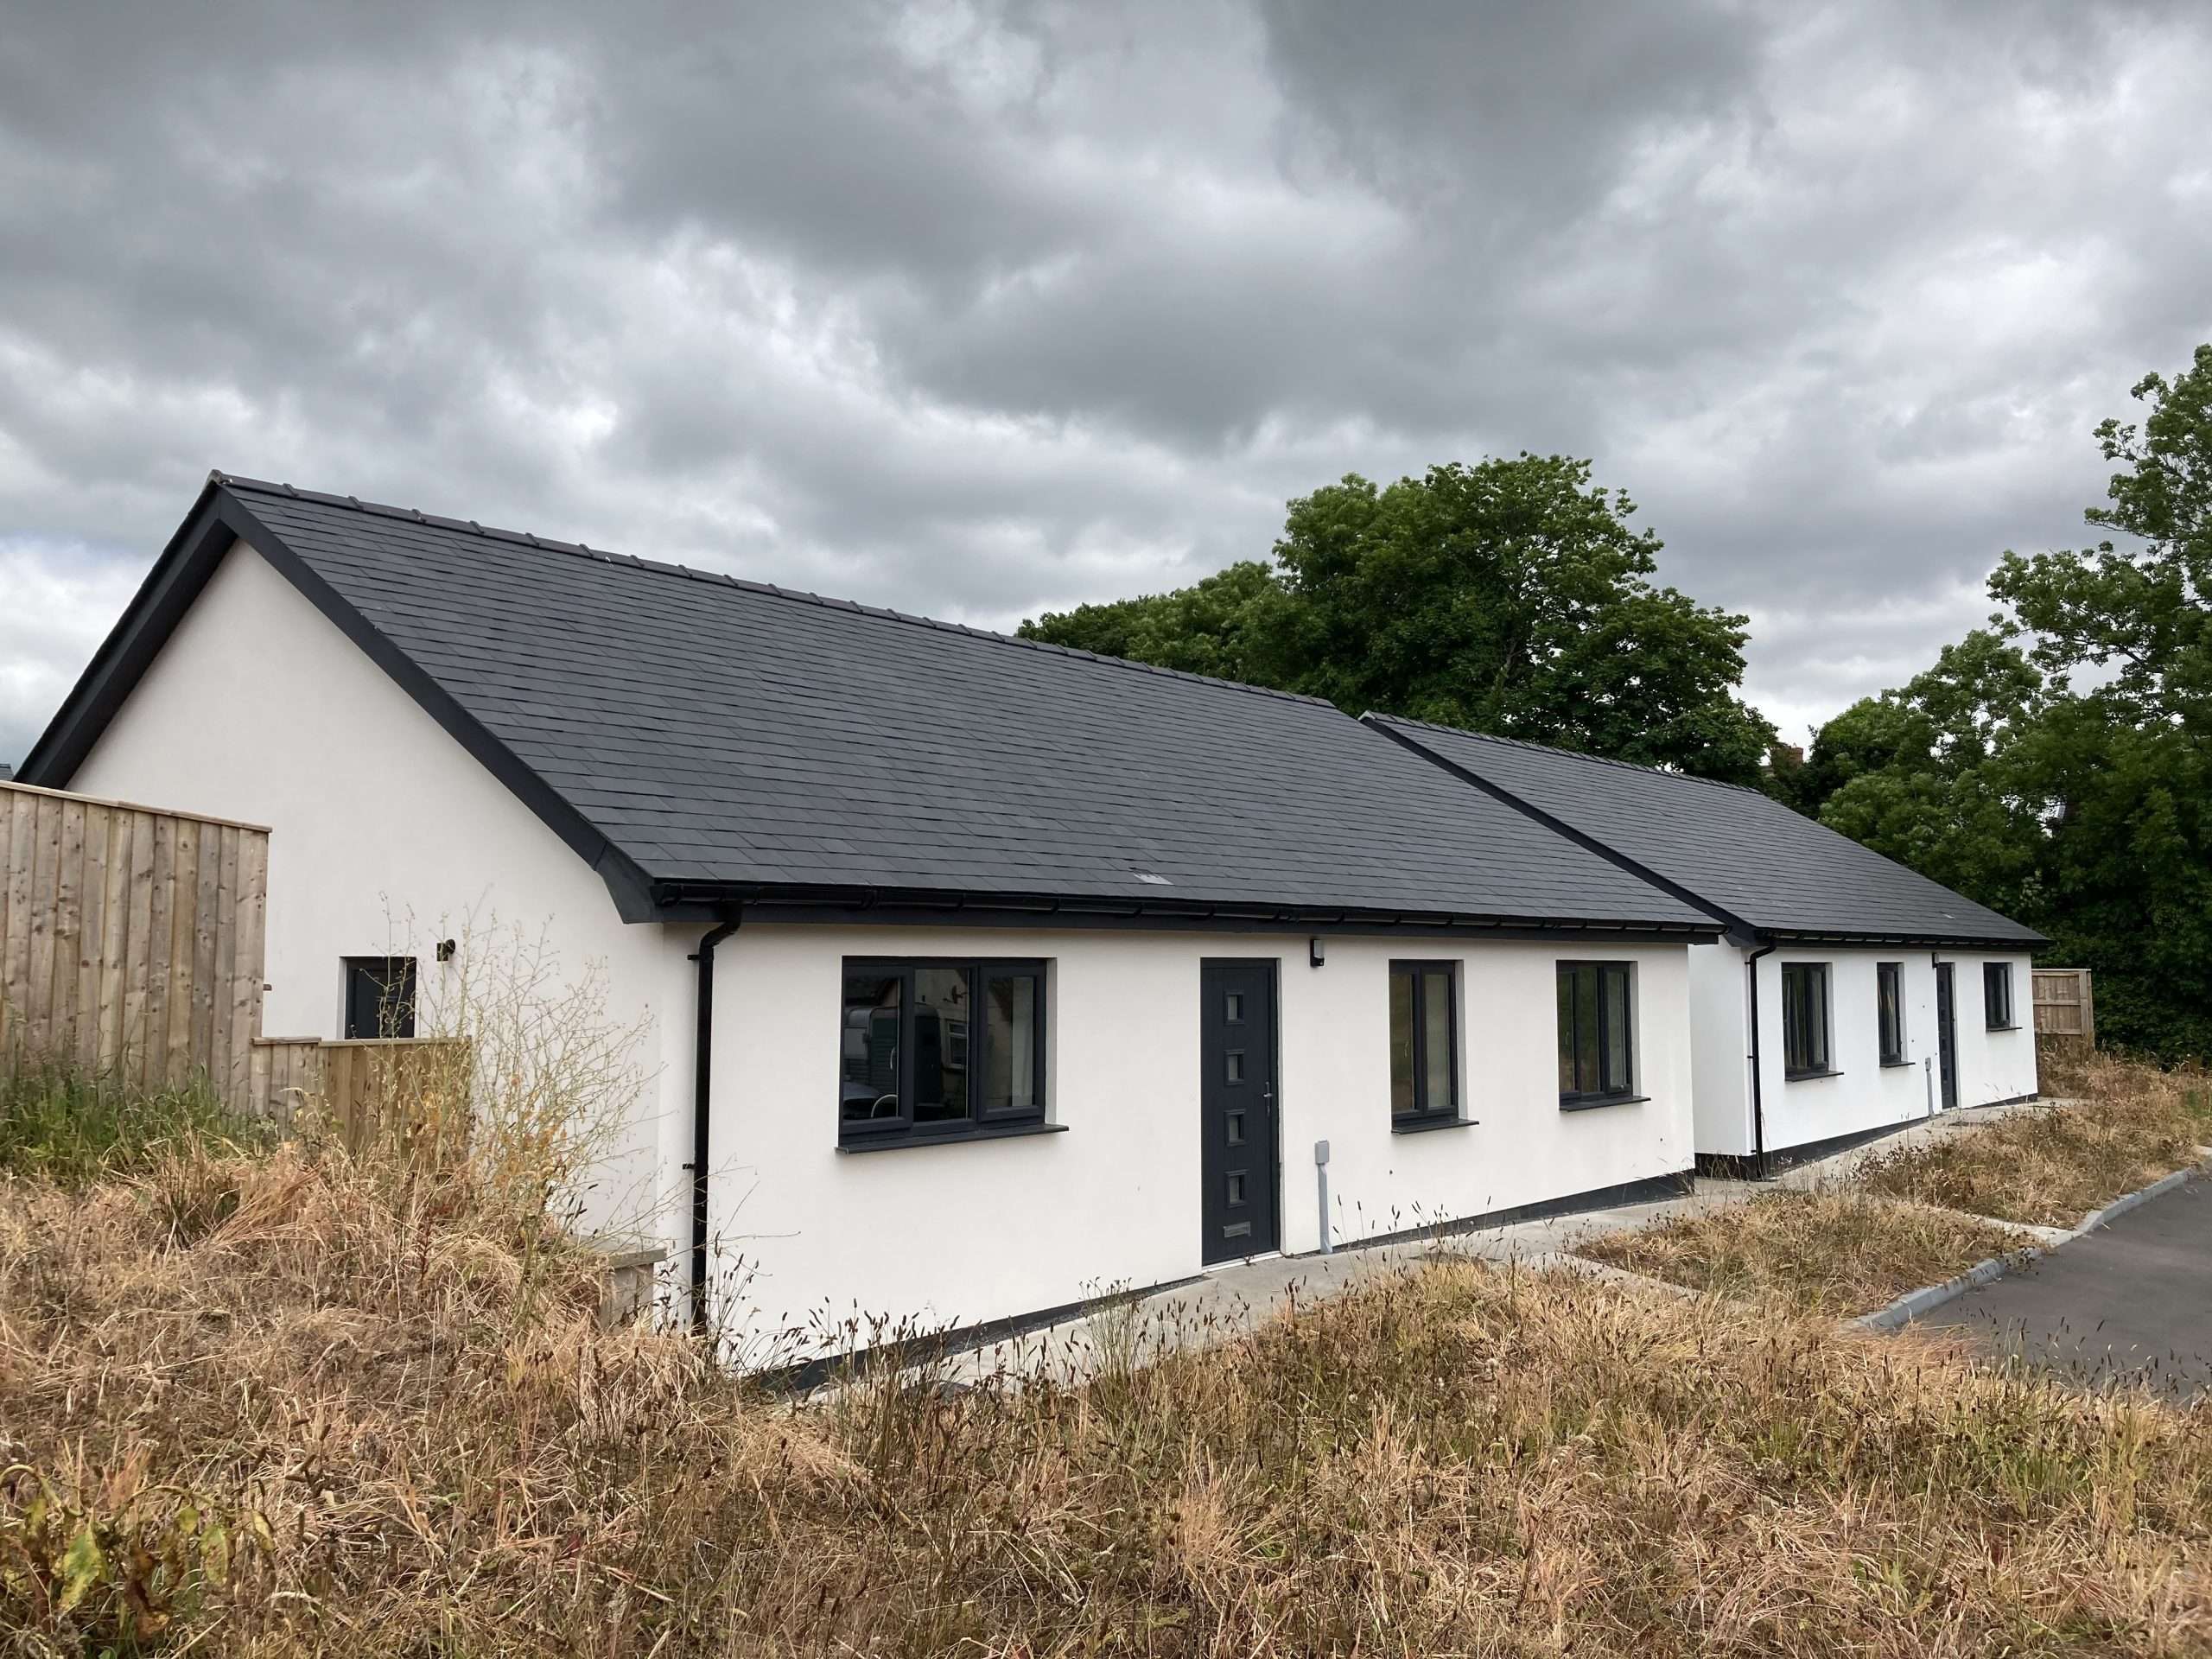 No interest in affordable bungalows in Laugharne